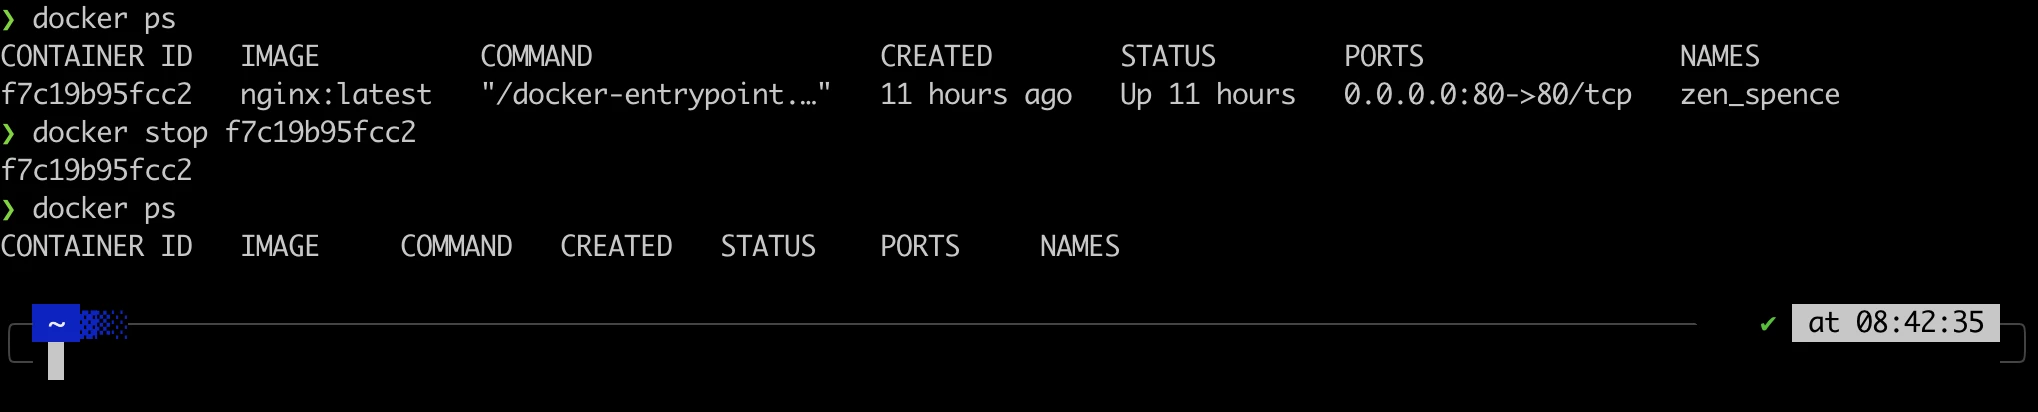 Docker ps output container list